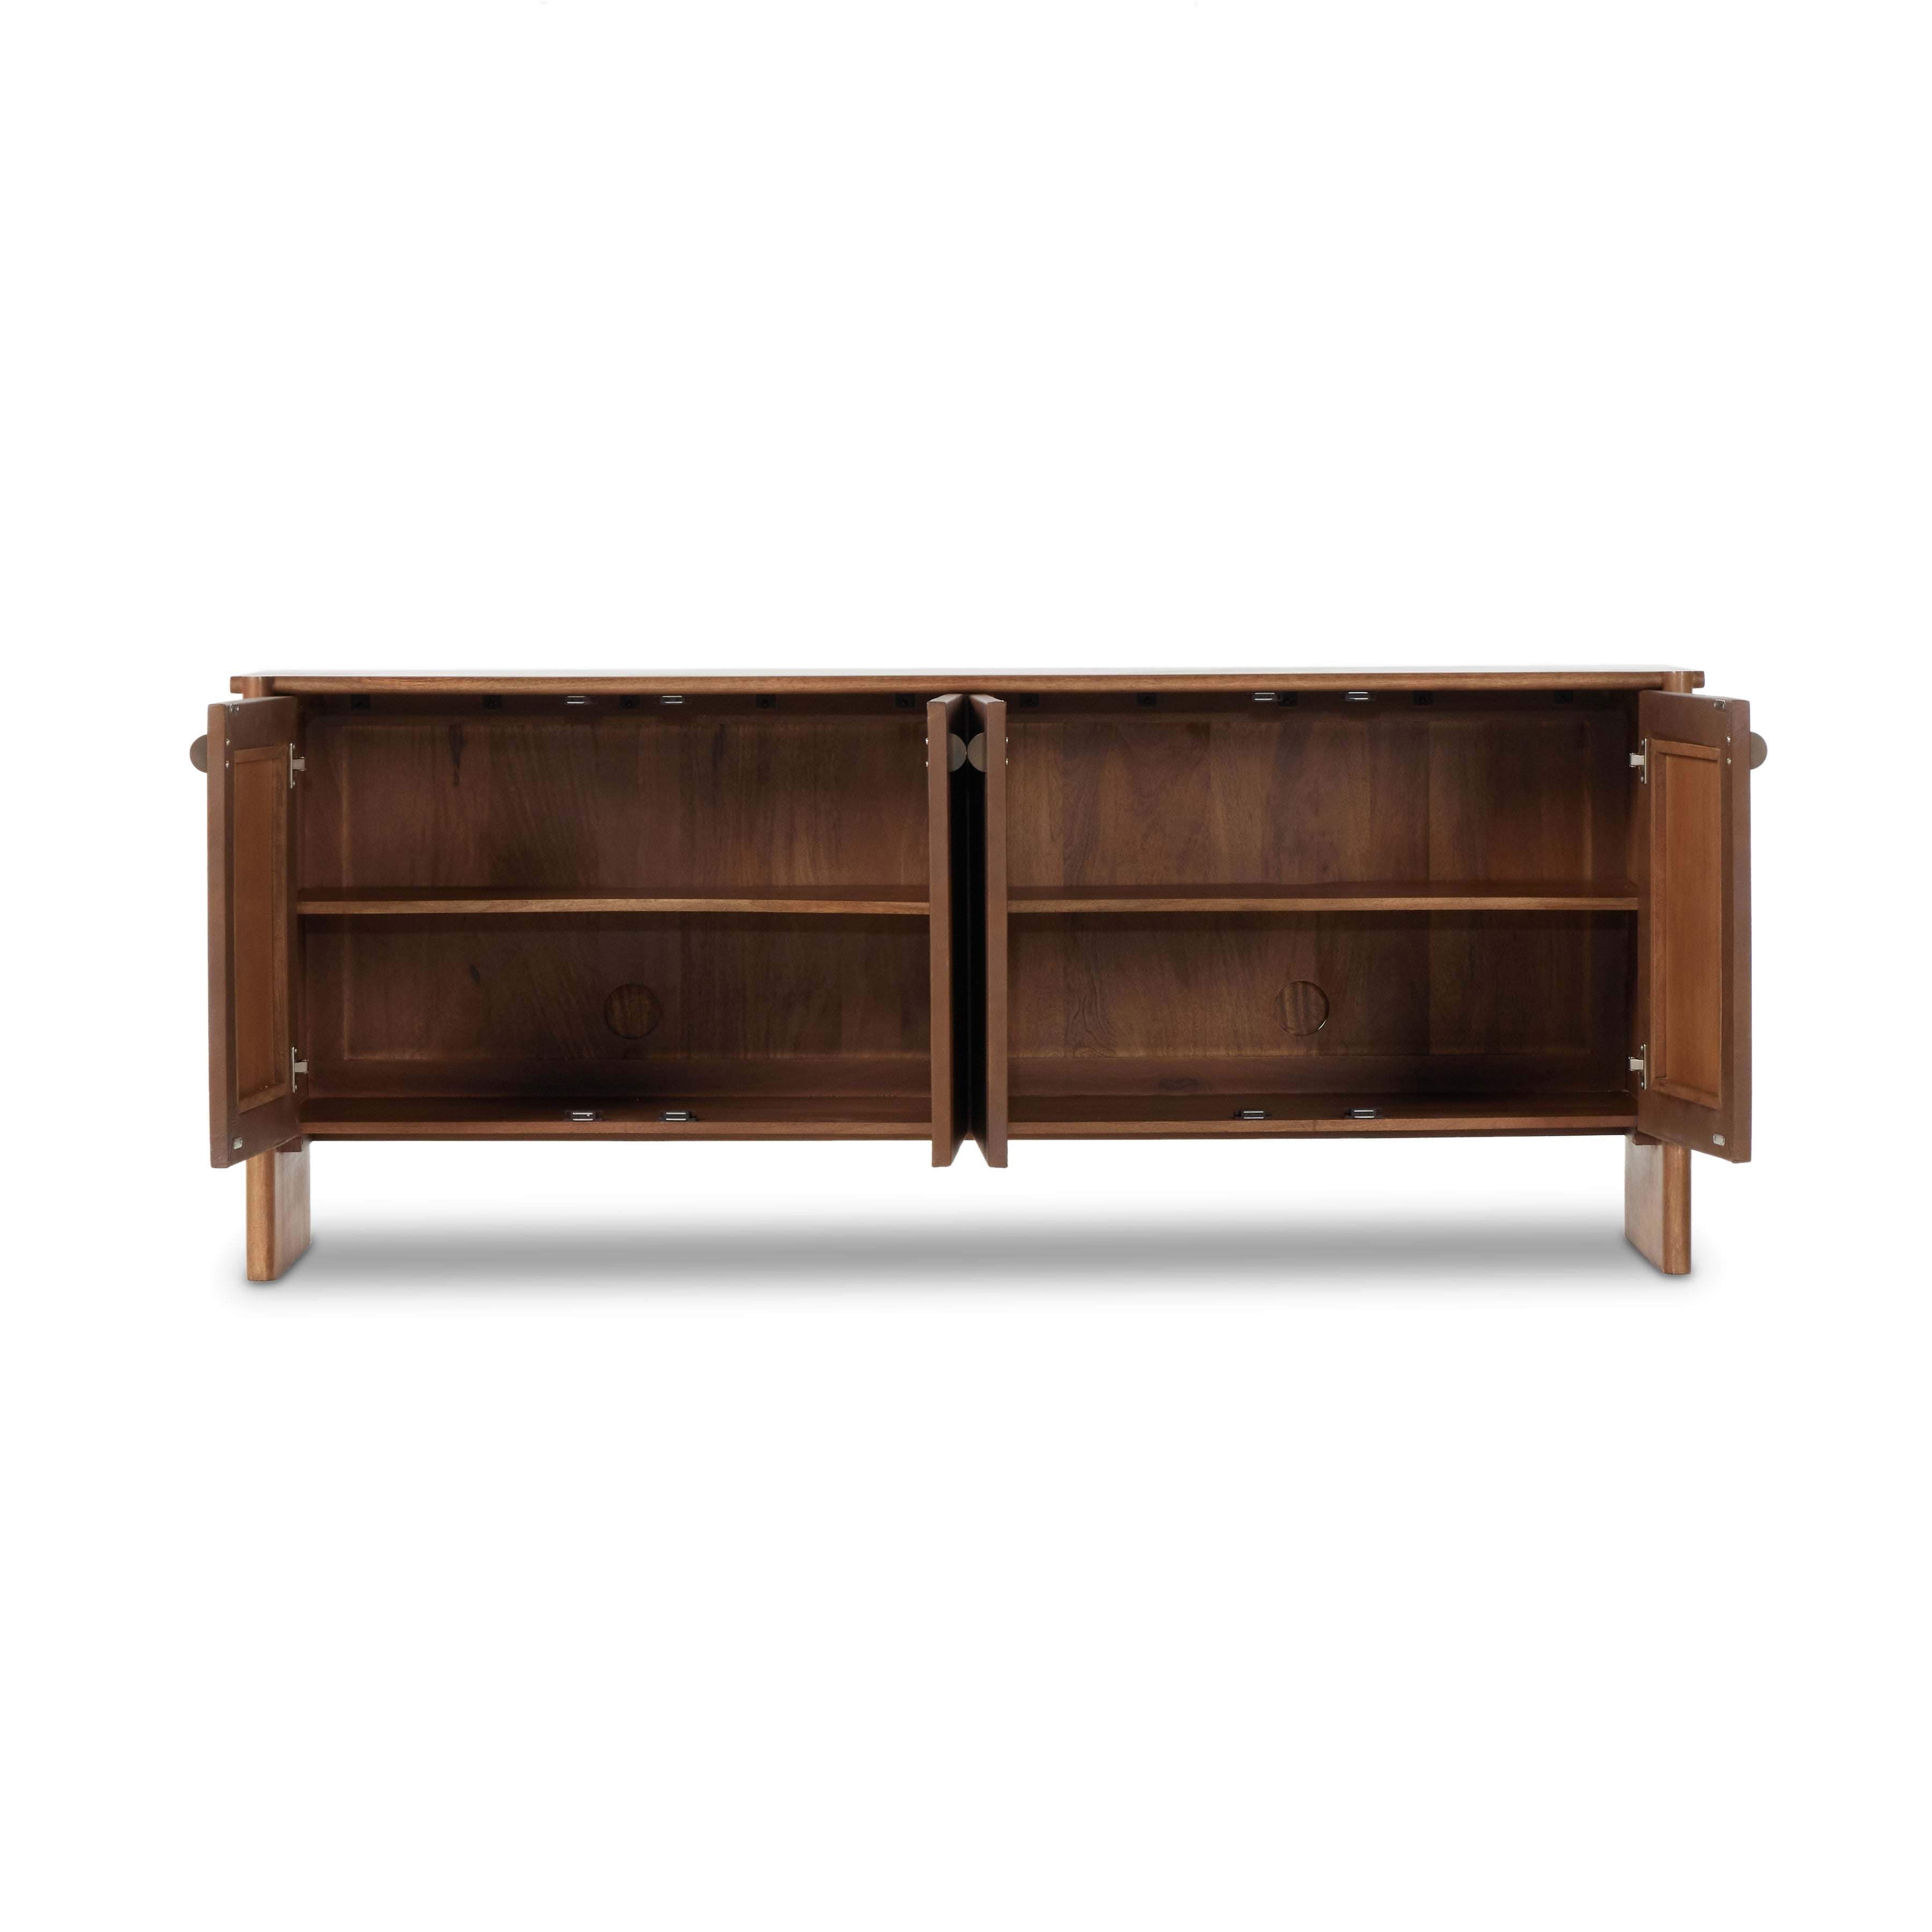 Curved edges and connection points meet leather door fronts, creating a smooth hand feel and look. Rounded offset hardware finishes this mango wood sideboard. Amethyst Home provides interior design, new construction, custom furniture, and area rugs in the Tampa metro area.